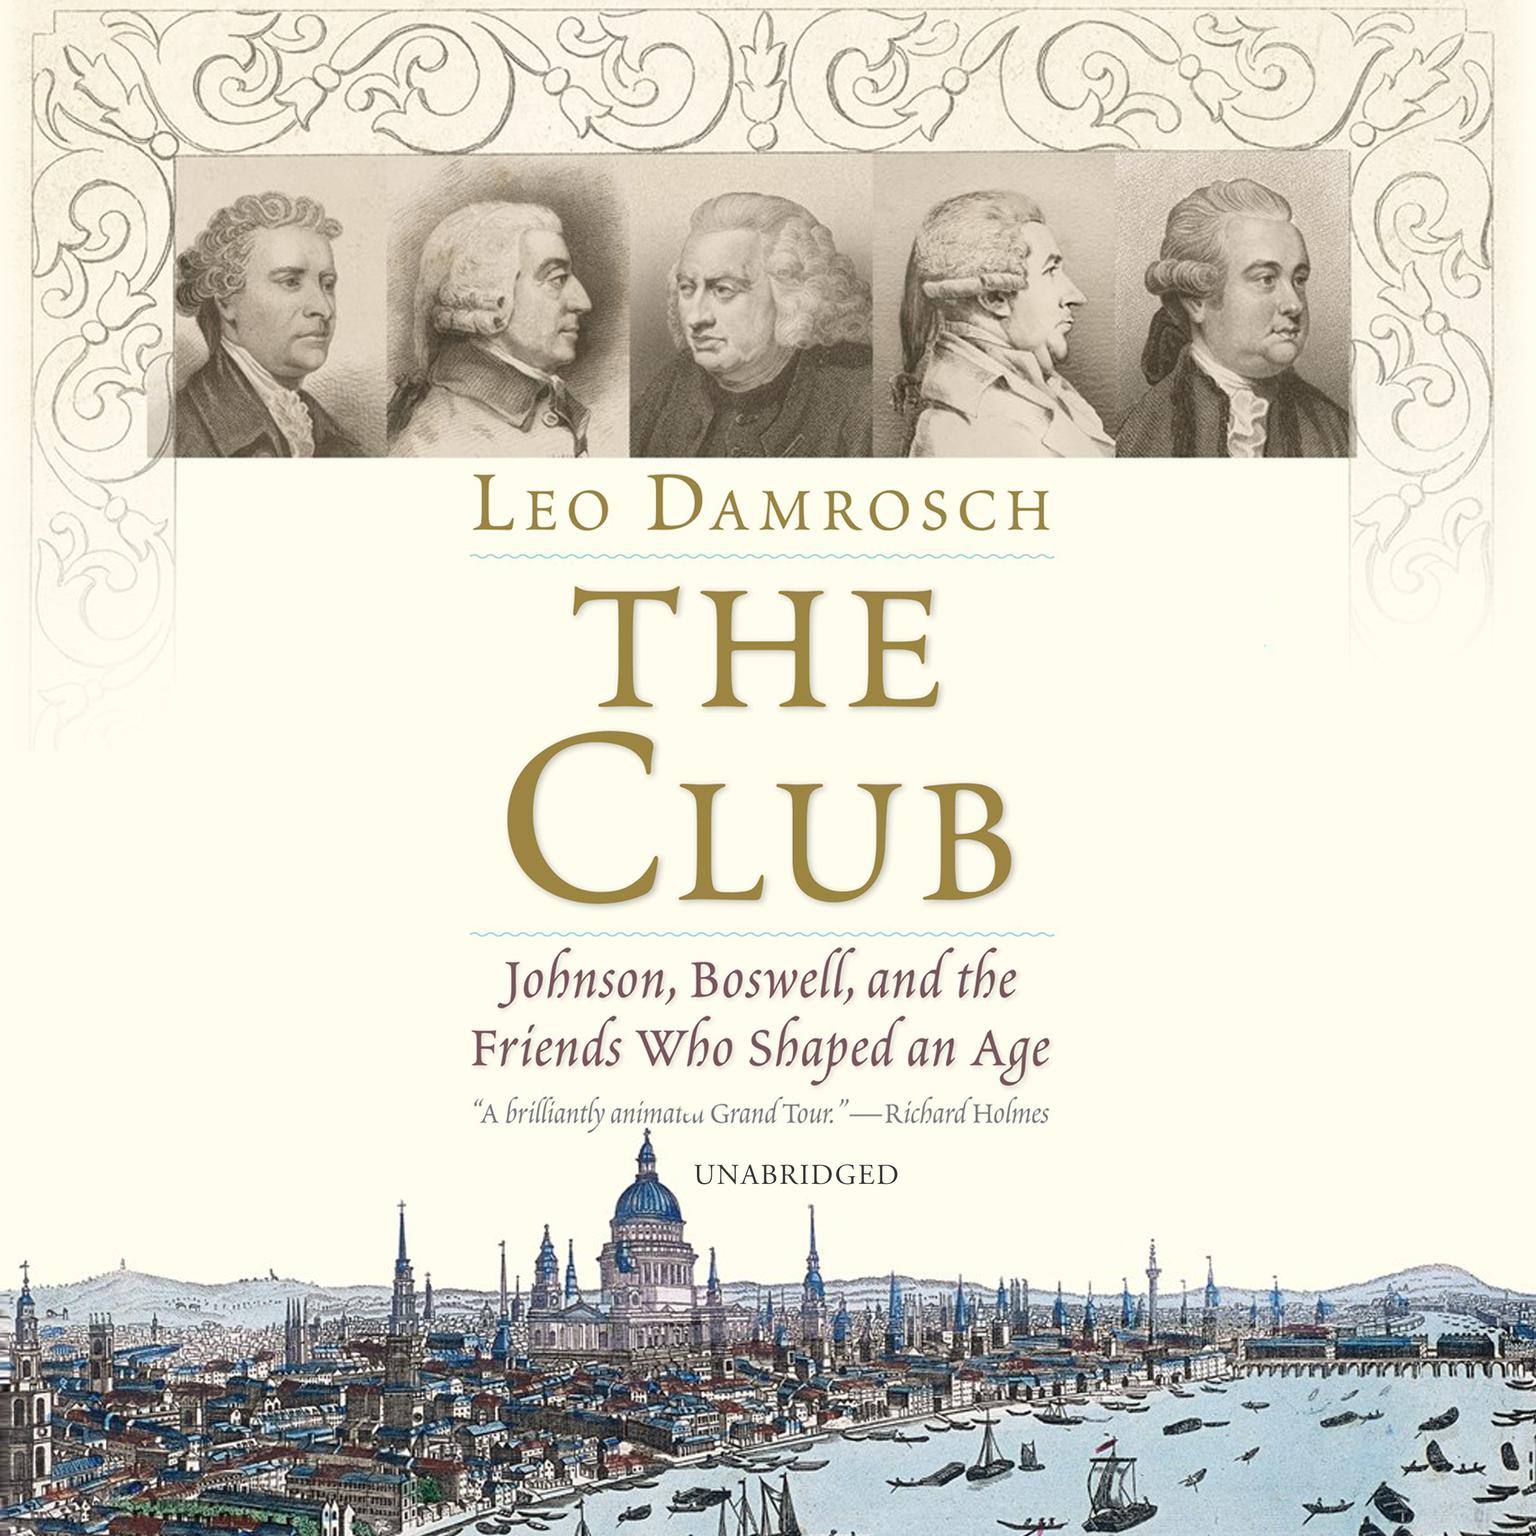 The Club: Johnson, Boswell, and the Friends Who Shaped an Age Audiobook, by Leo Damrosch